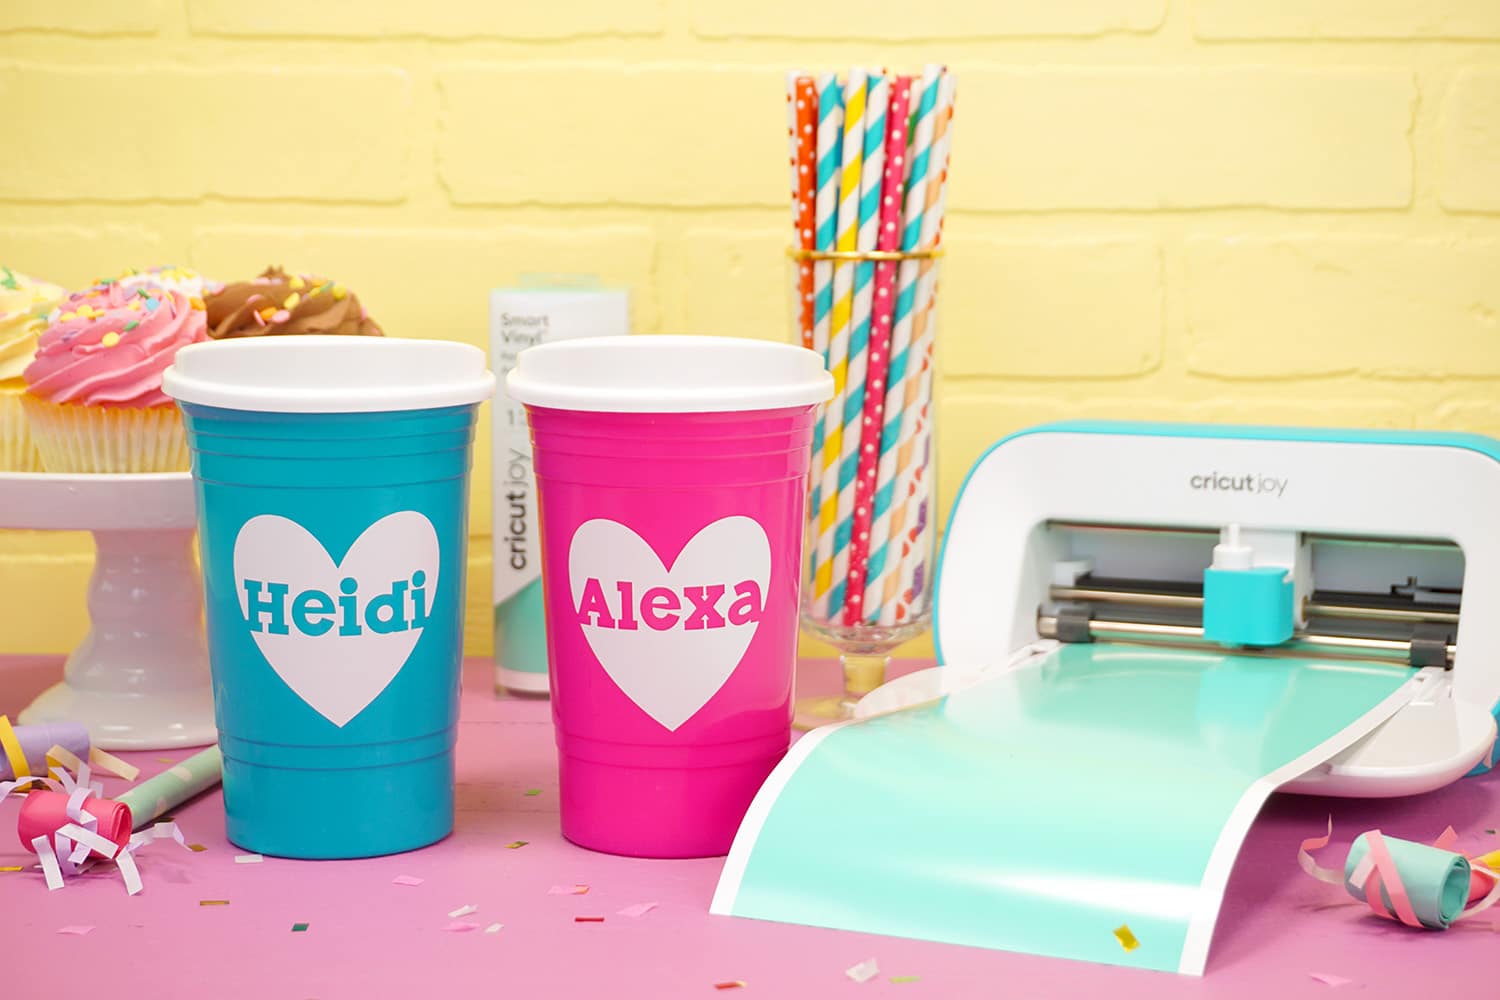 cricut joy with personalized party cups and supplies